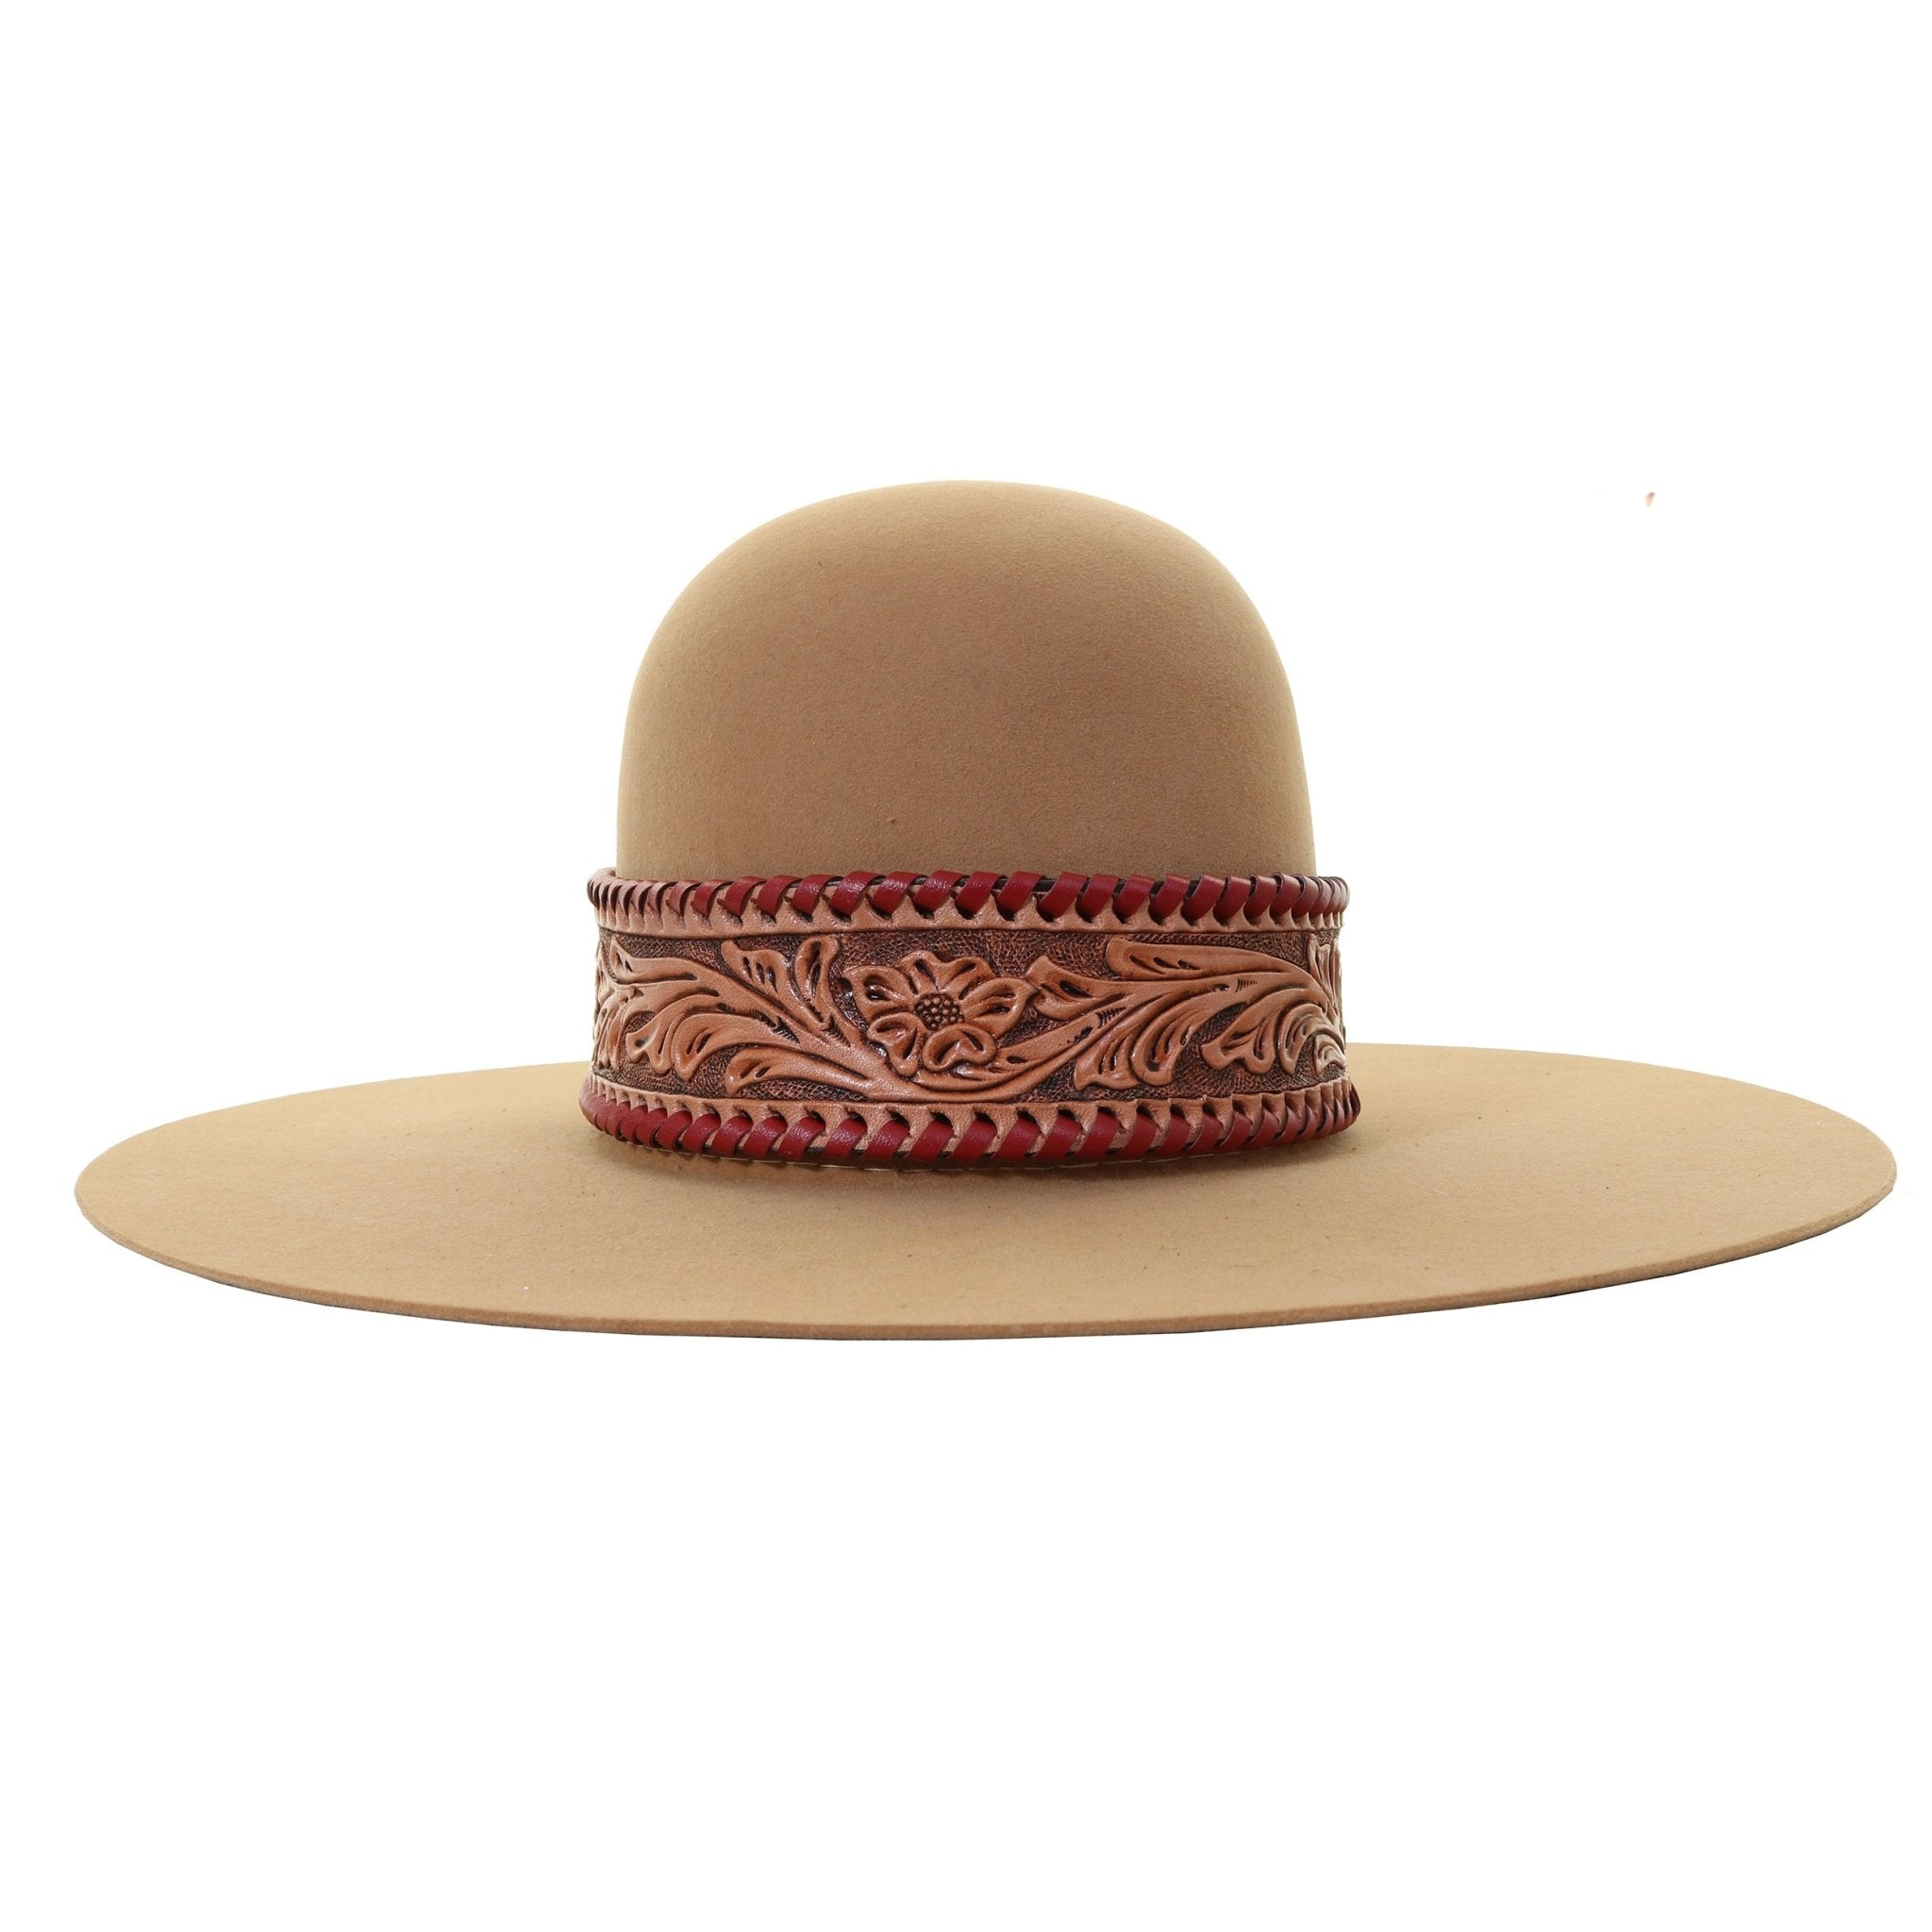 Source for Tooled Leather Hat bands? : r/hats